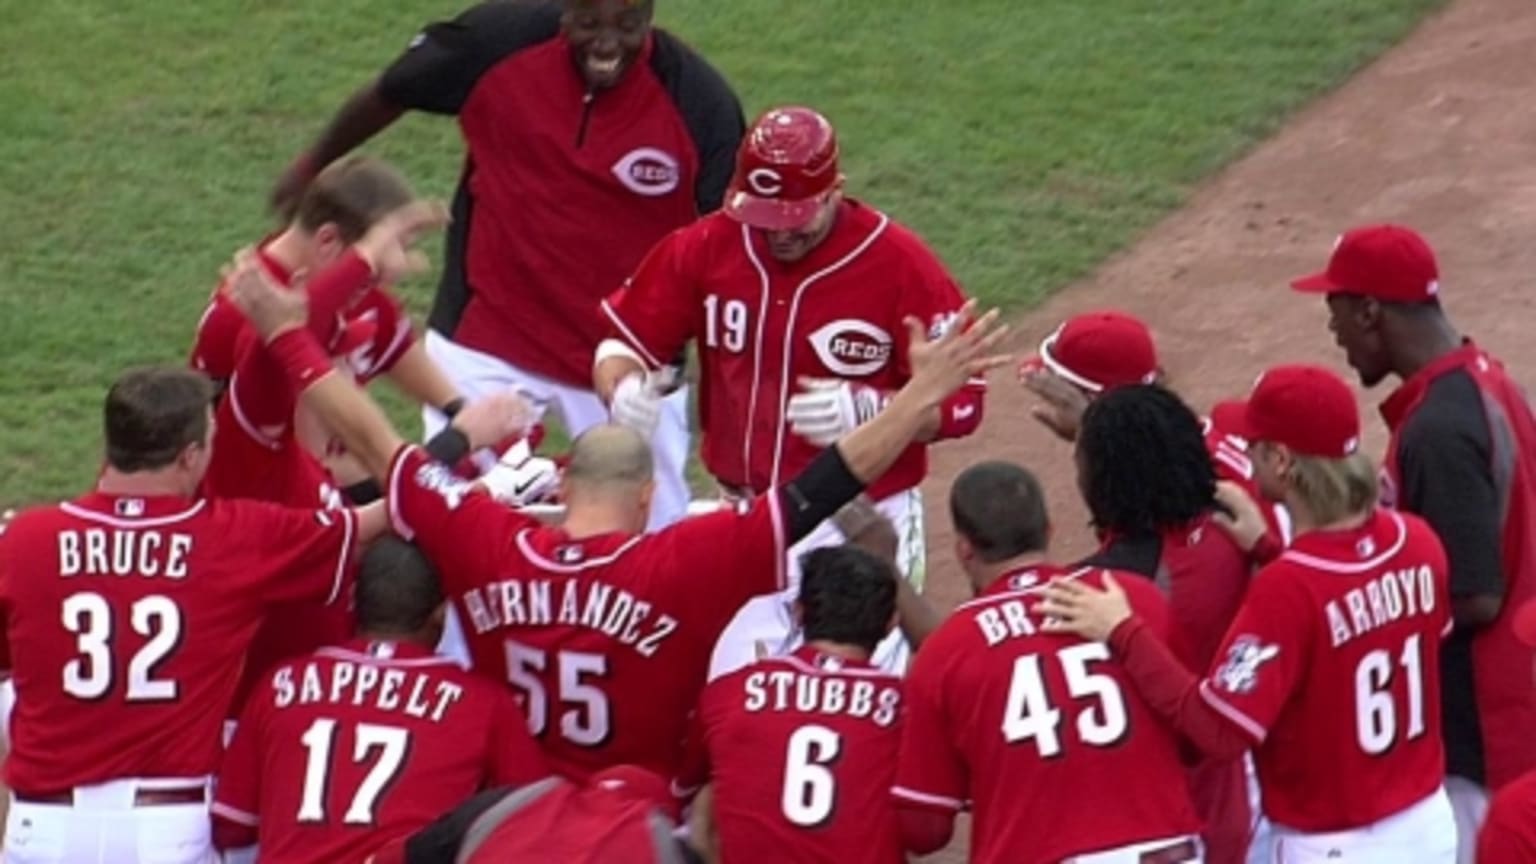 Votto, Bell ejected in heated scene; Padres fan also tossed